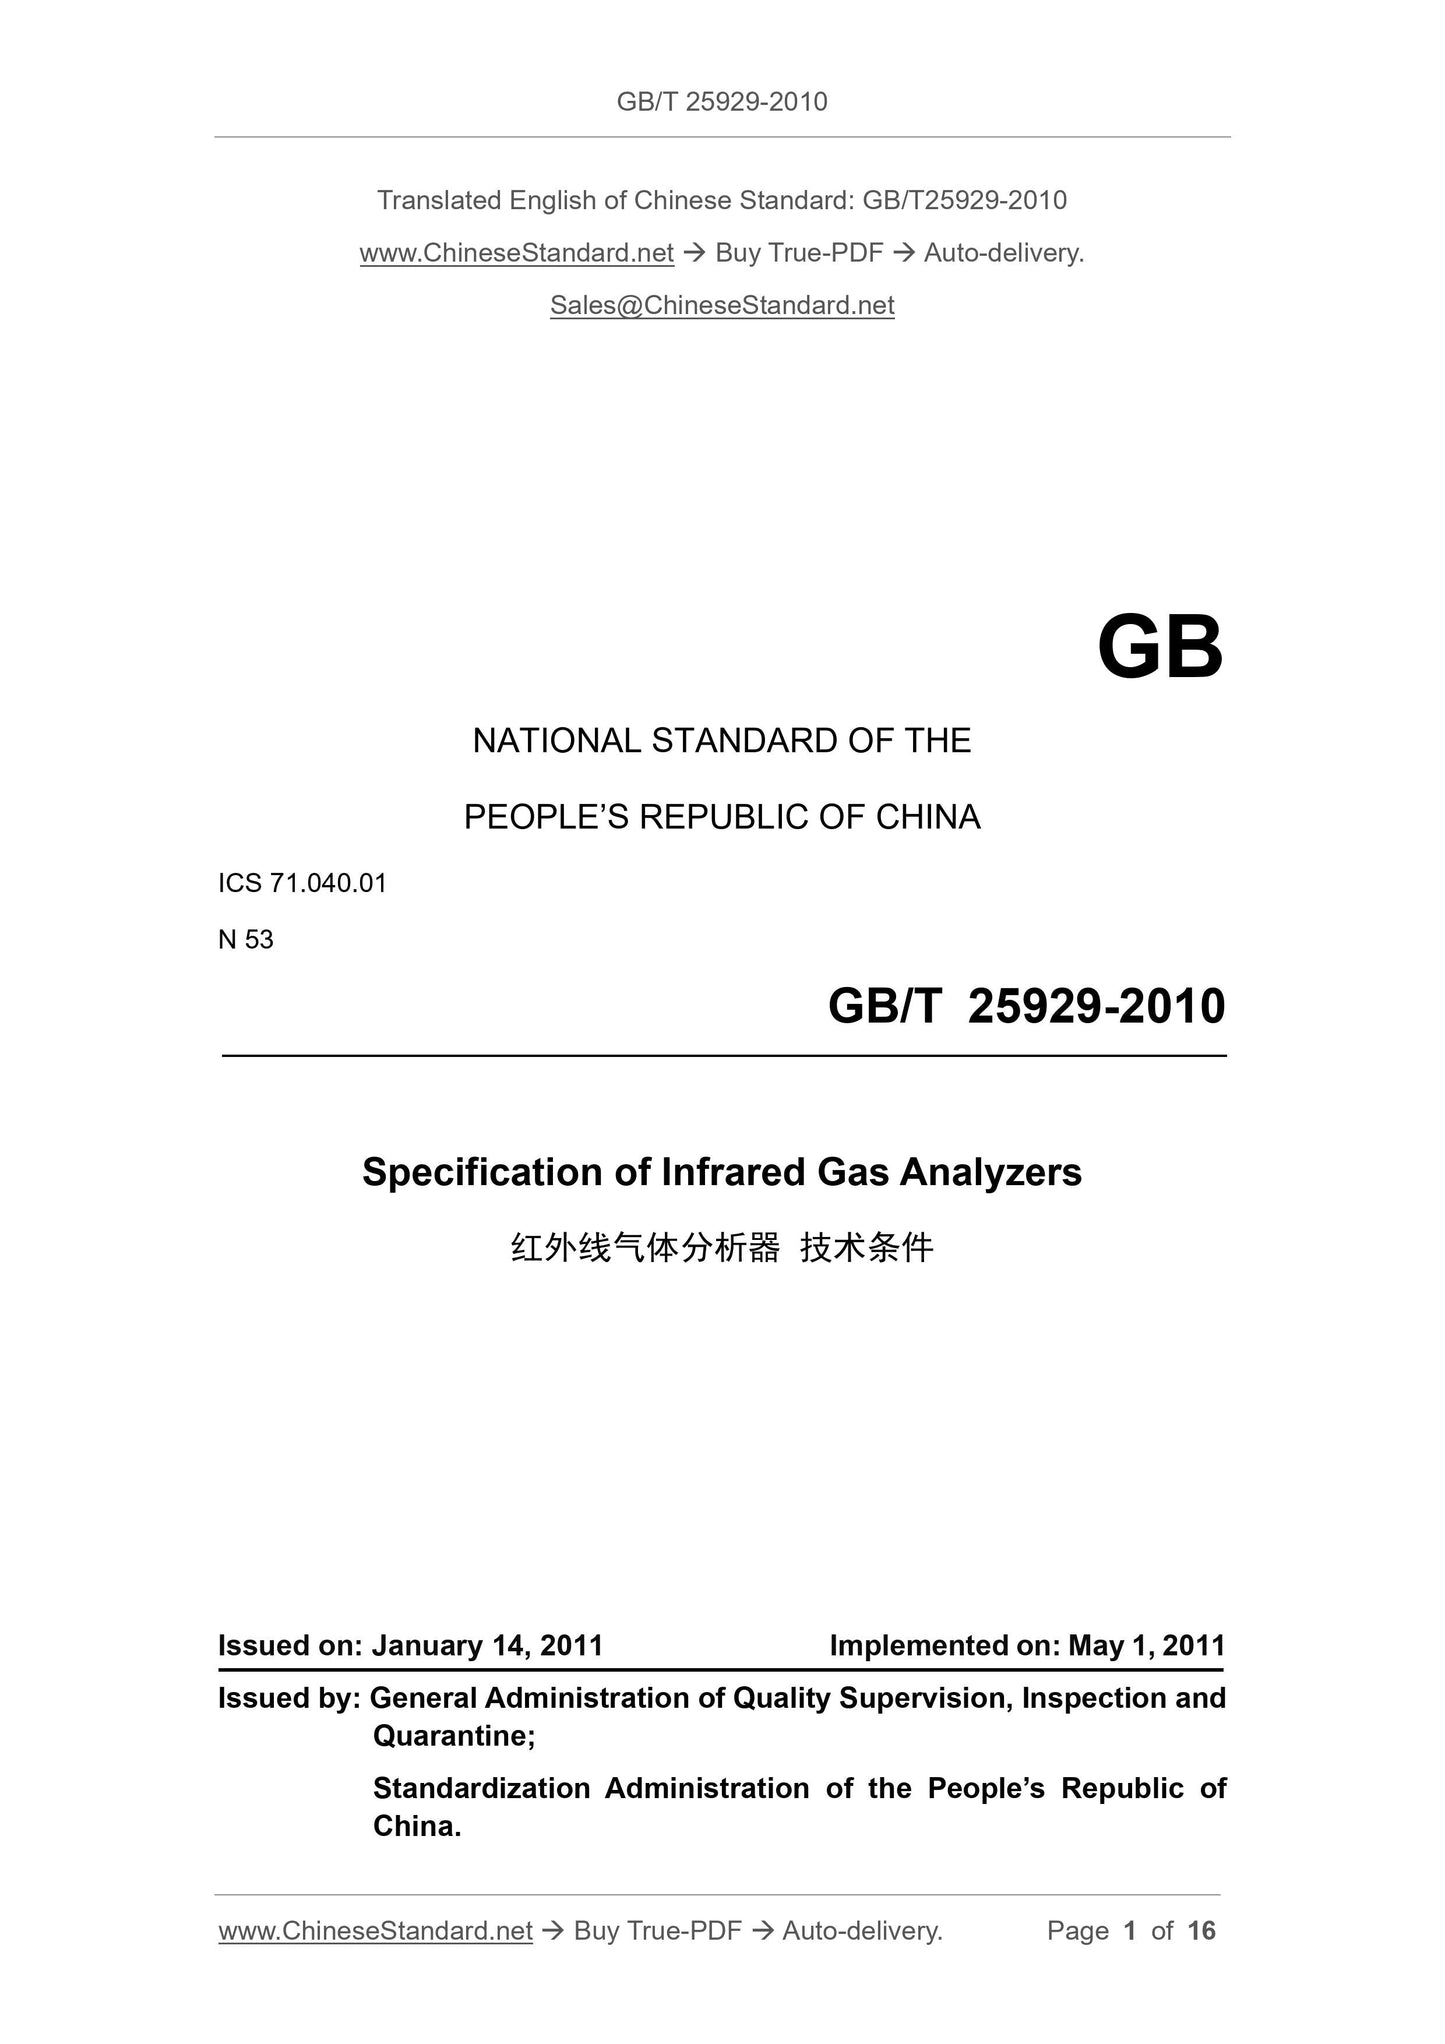 GB/T 25929-2010 Page 1